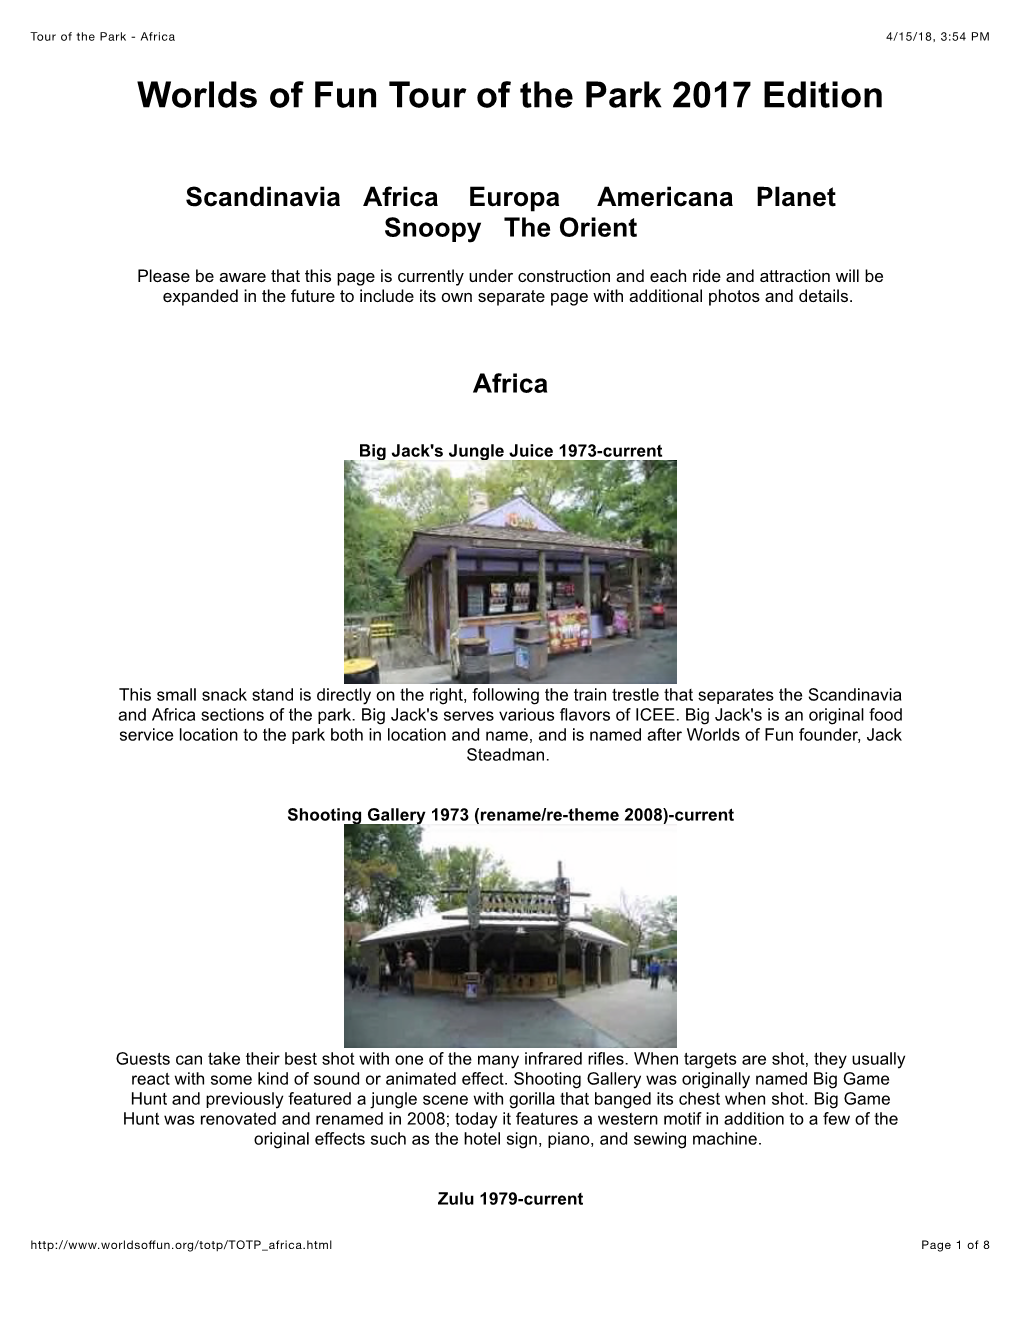 Africa 4/15/18, 3:54 PM Worlds of Fun Tour of the Park 2017 Edition